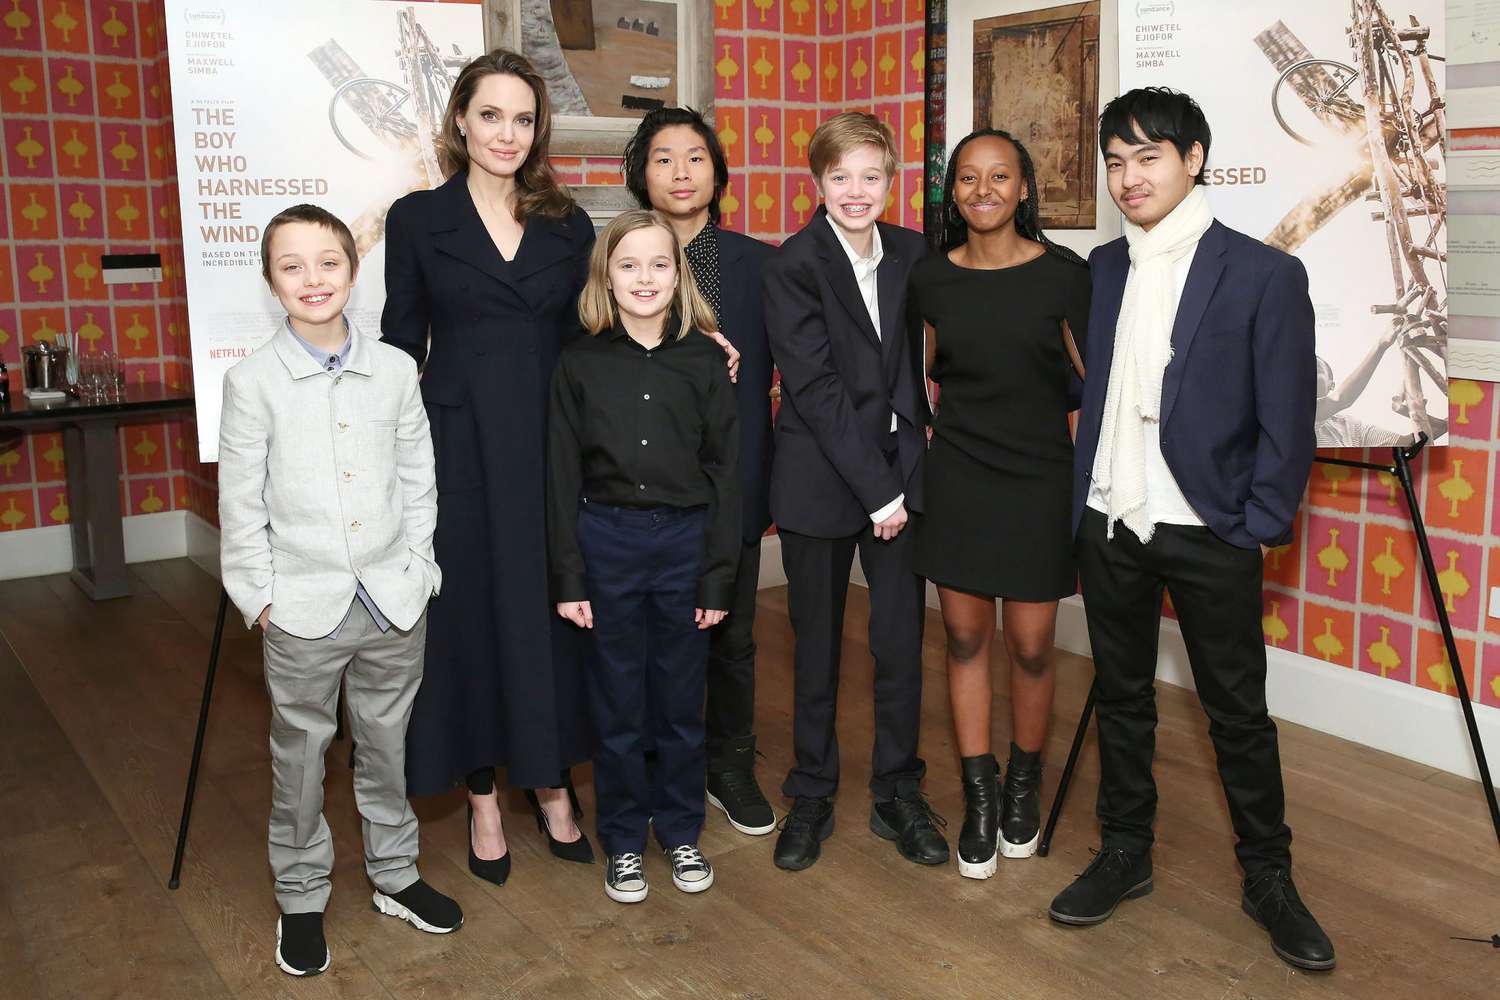 BESTPIX - "The Boy Who Harnessed The Wind" Special Screening, Hosted by Angelina Jolie